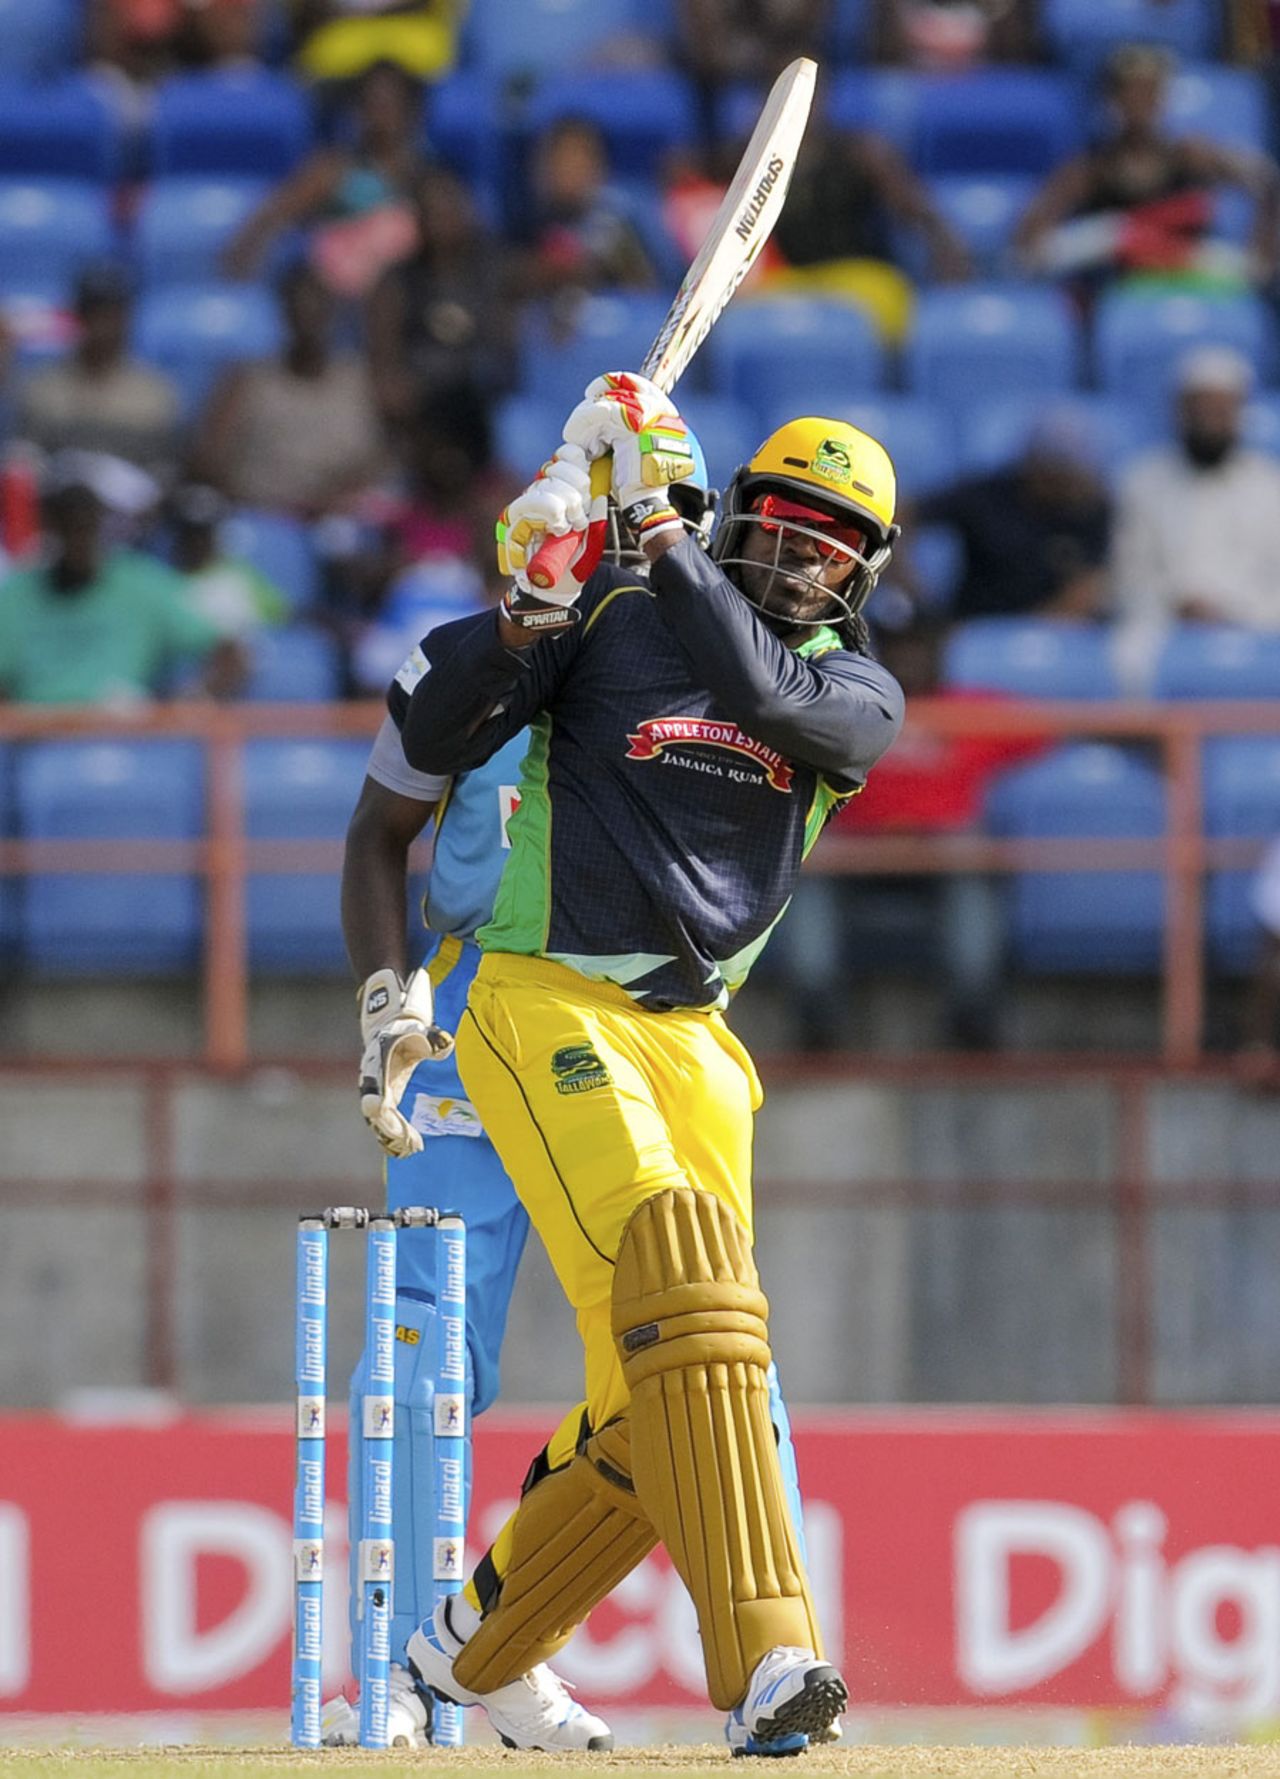 Chris Gayle scored the CPL's first ever century with 111 not out off 63 balls, St Lucia Zouks v Jamaica Tallawahs, CPL 2014, Grenada, July 12, 2014